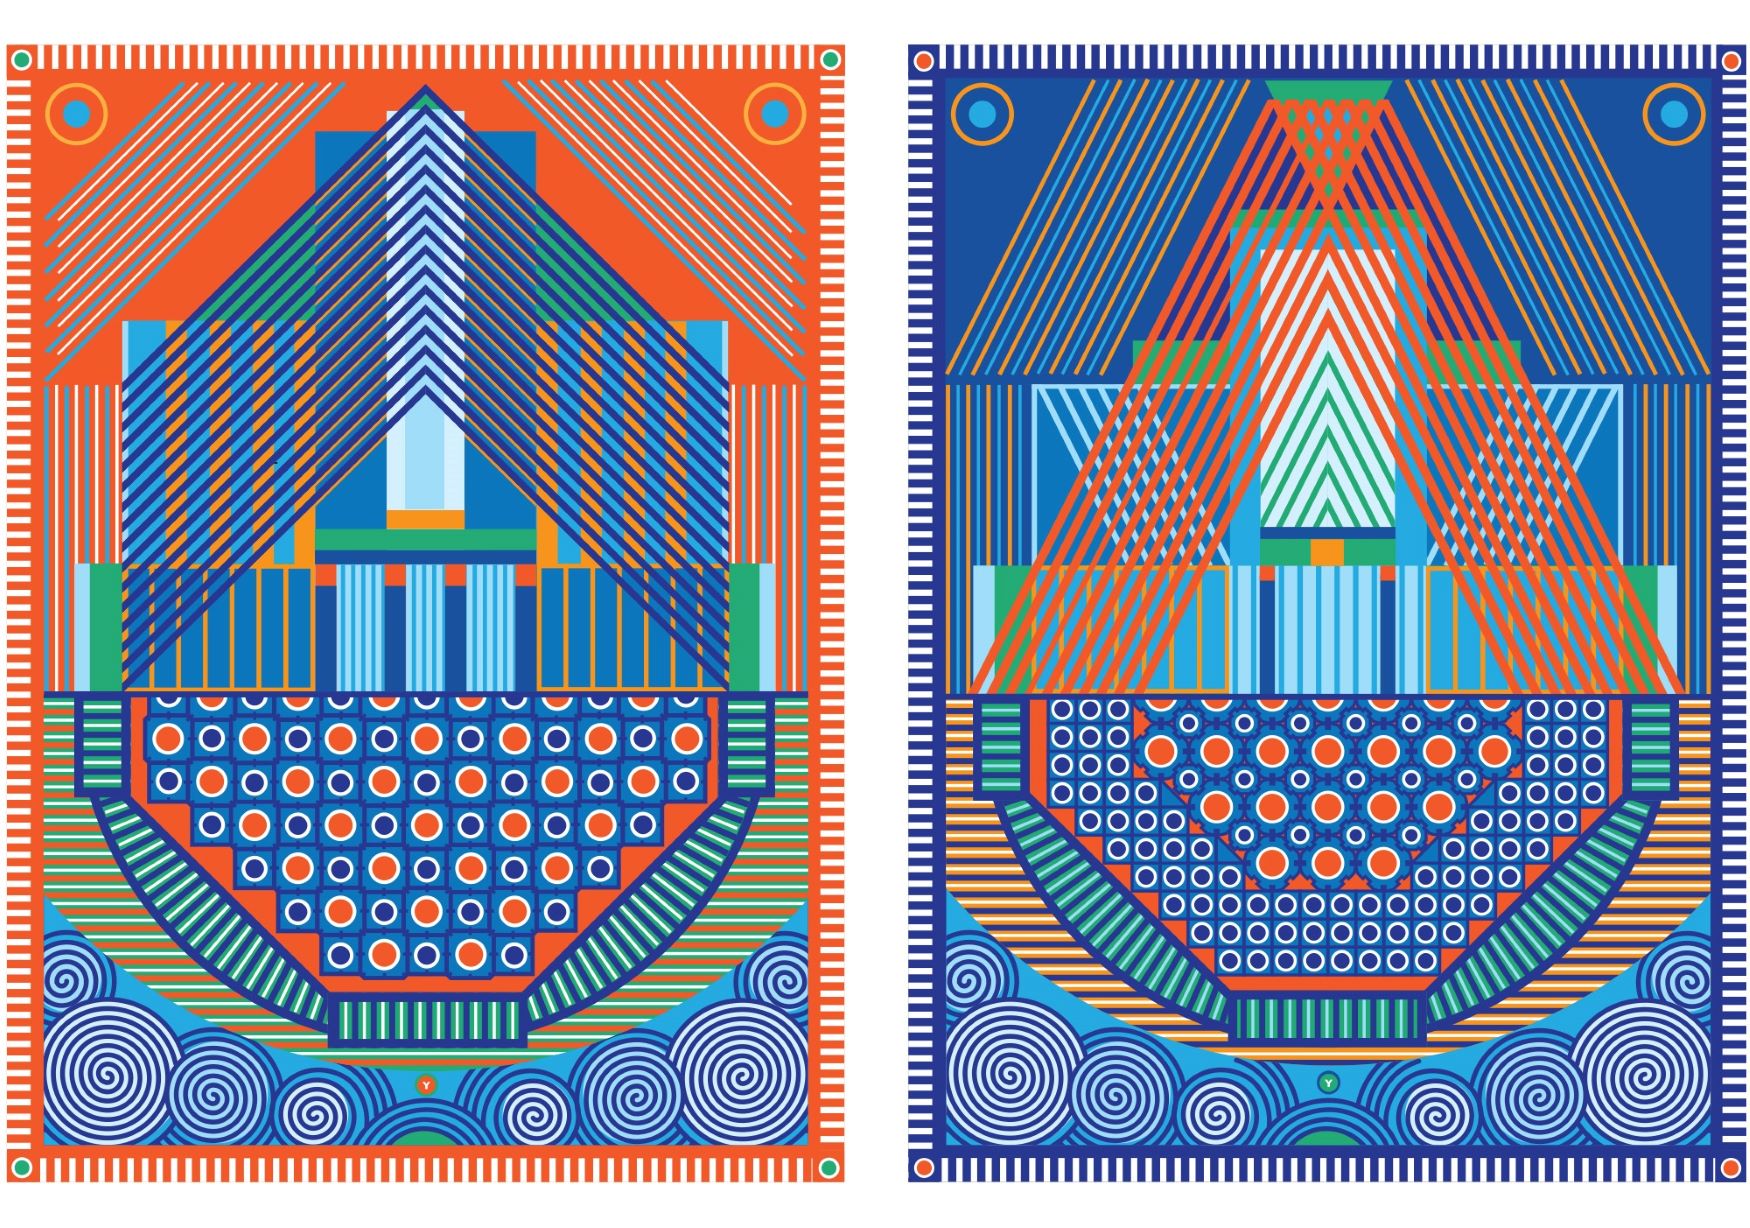 Two new tapestries by Yelena Popova called Keepsafe (I and II)